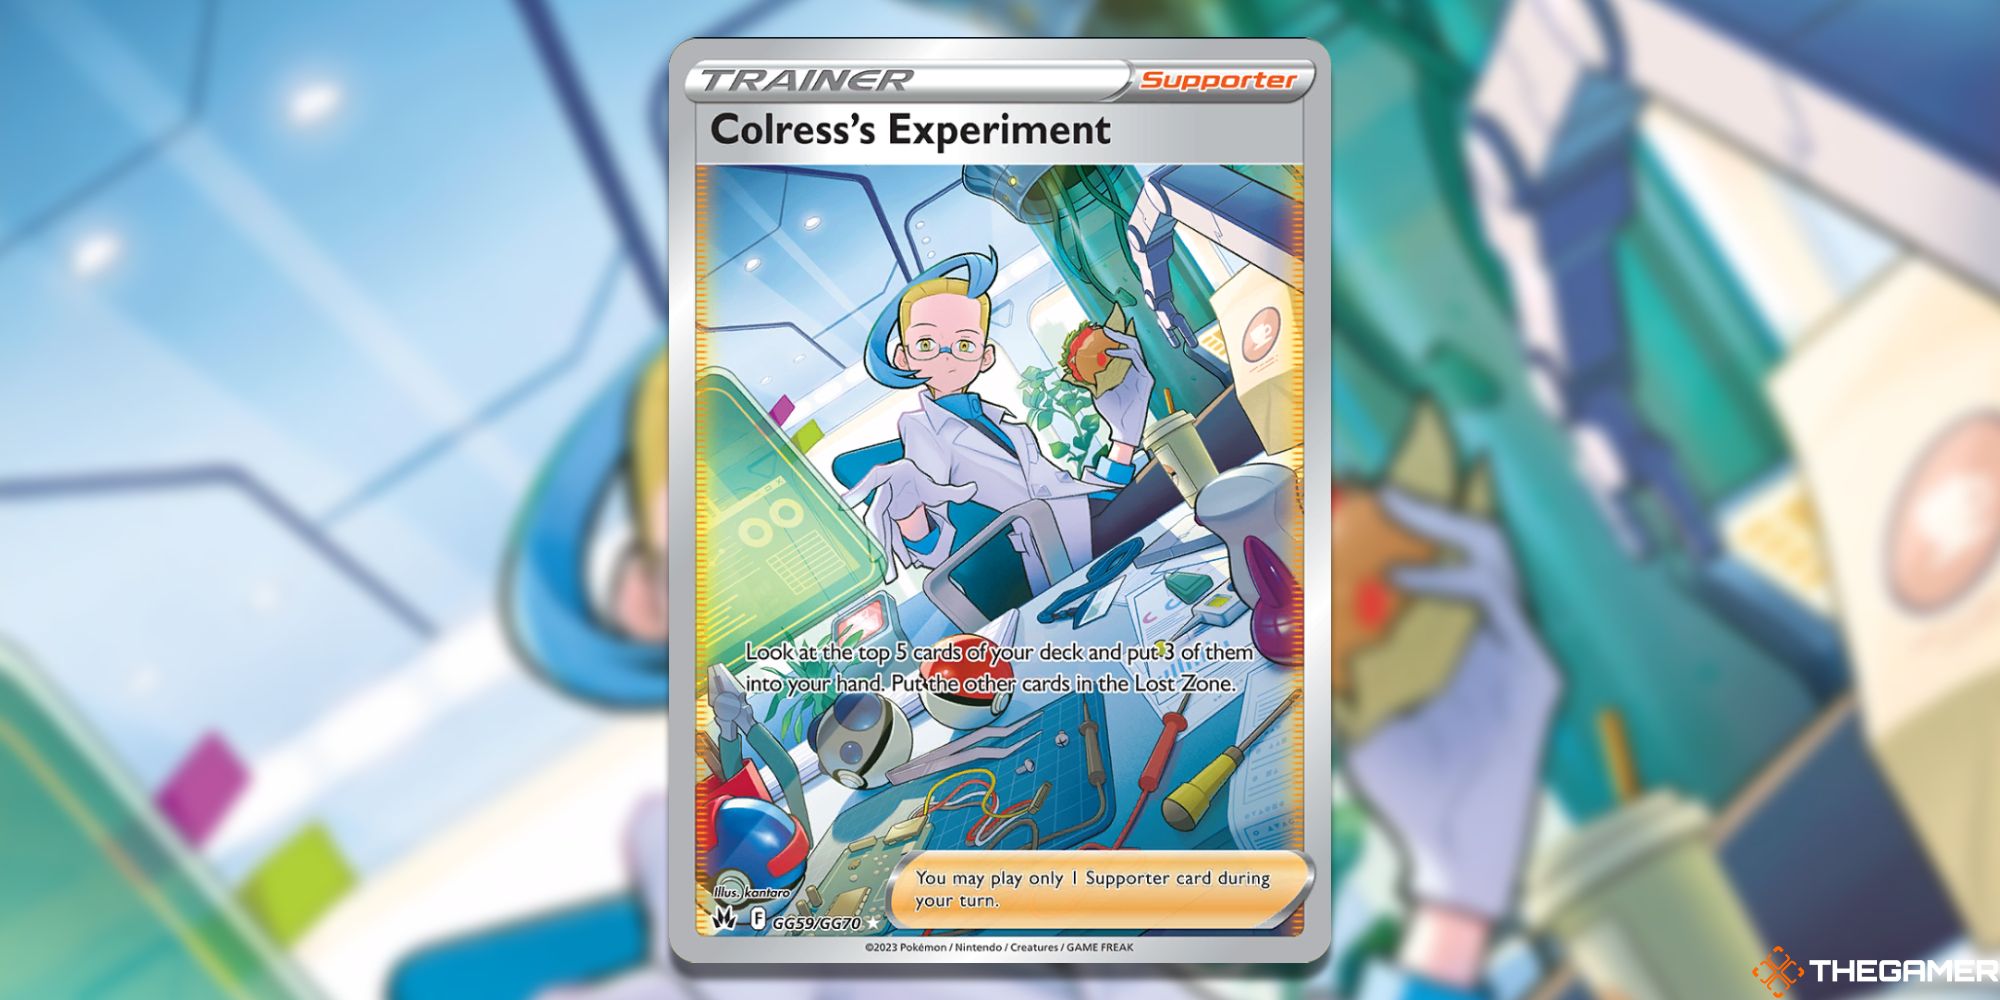 Colress's Experiment Galarian Gallery card from Pokemon TCG